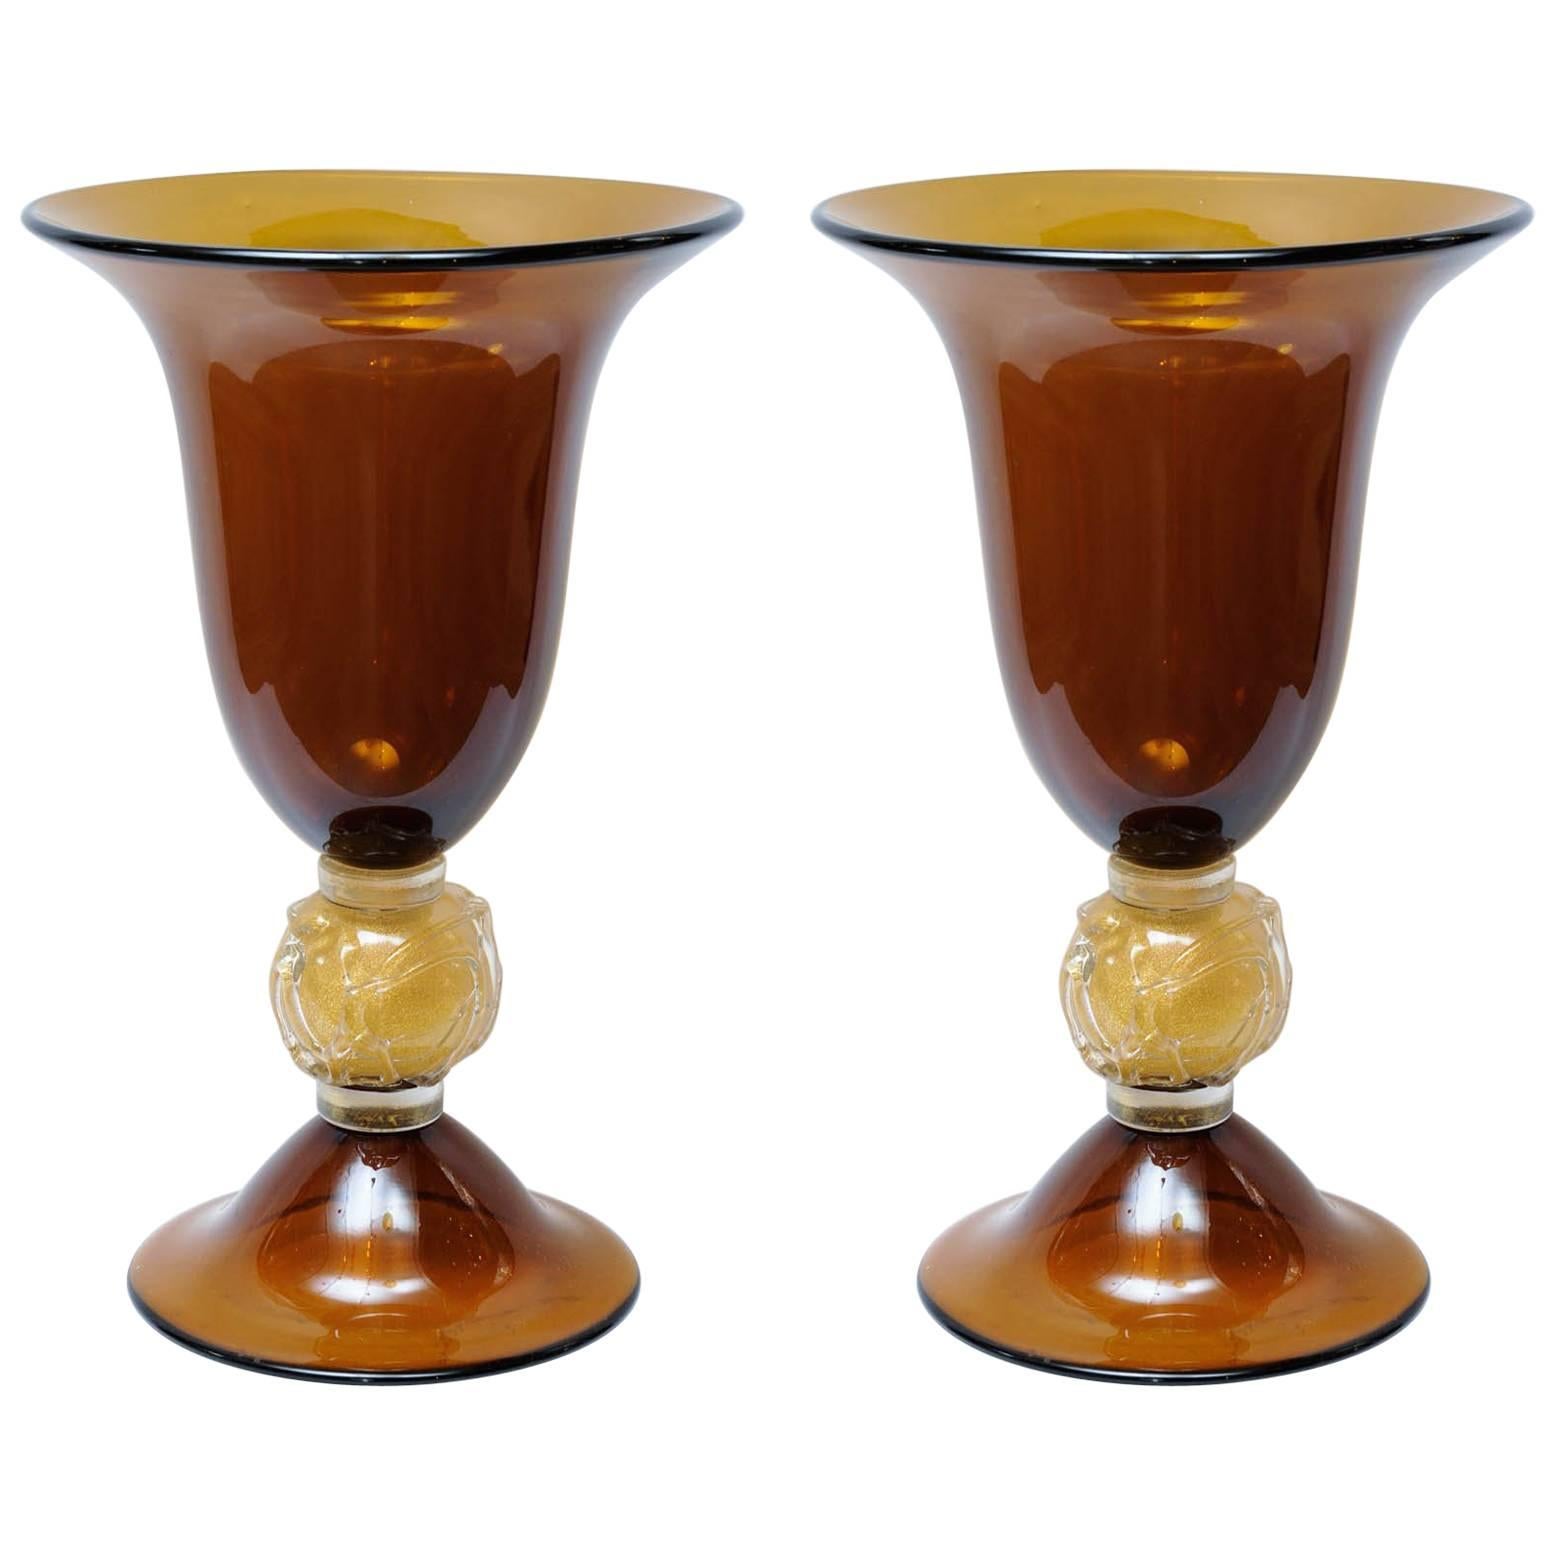 Pair of Vases in Murano Glass Signed “Toso Murano”